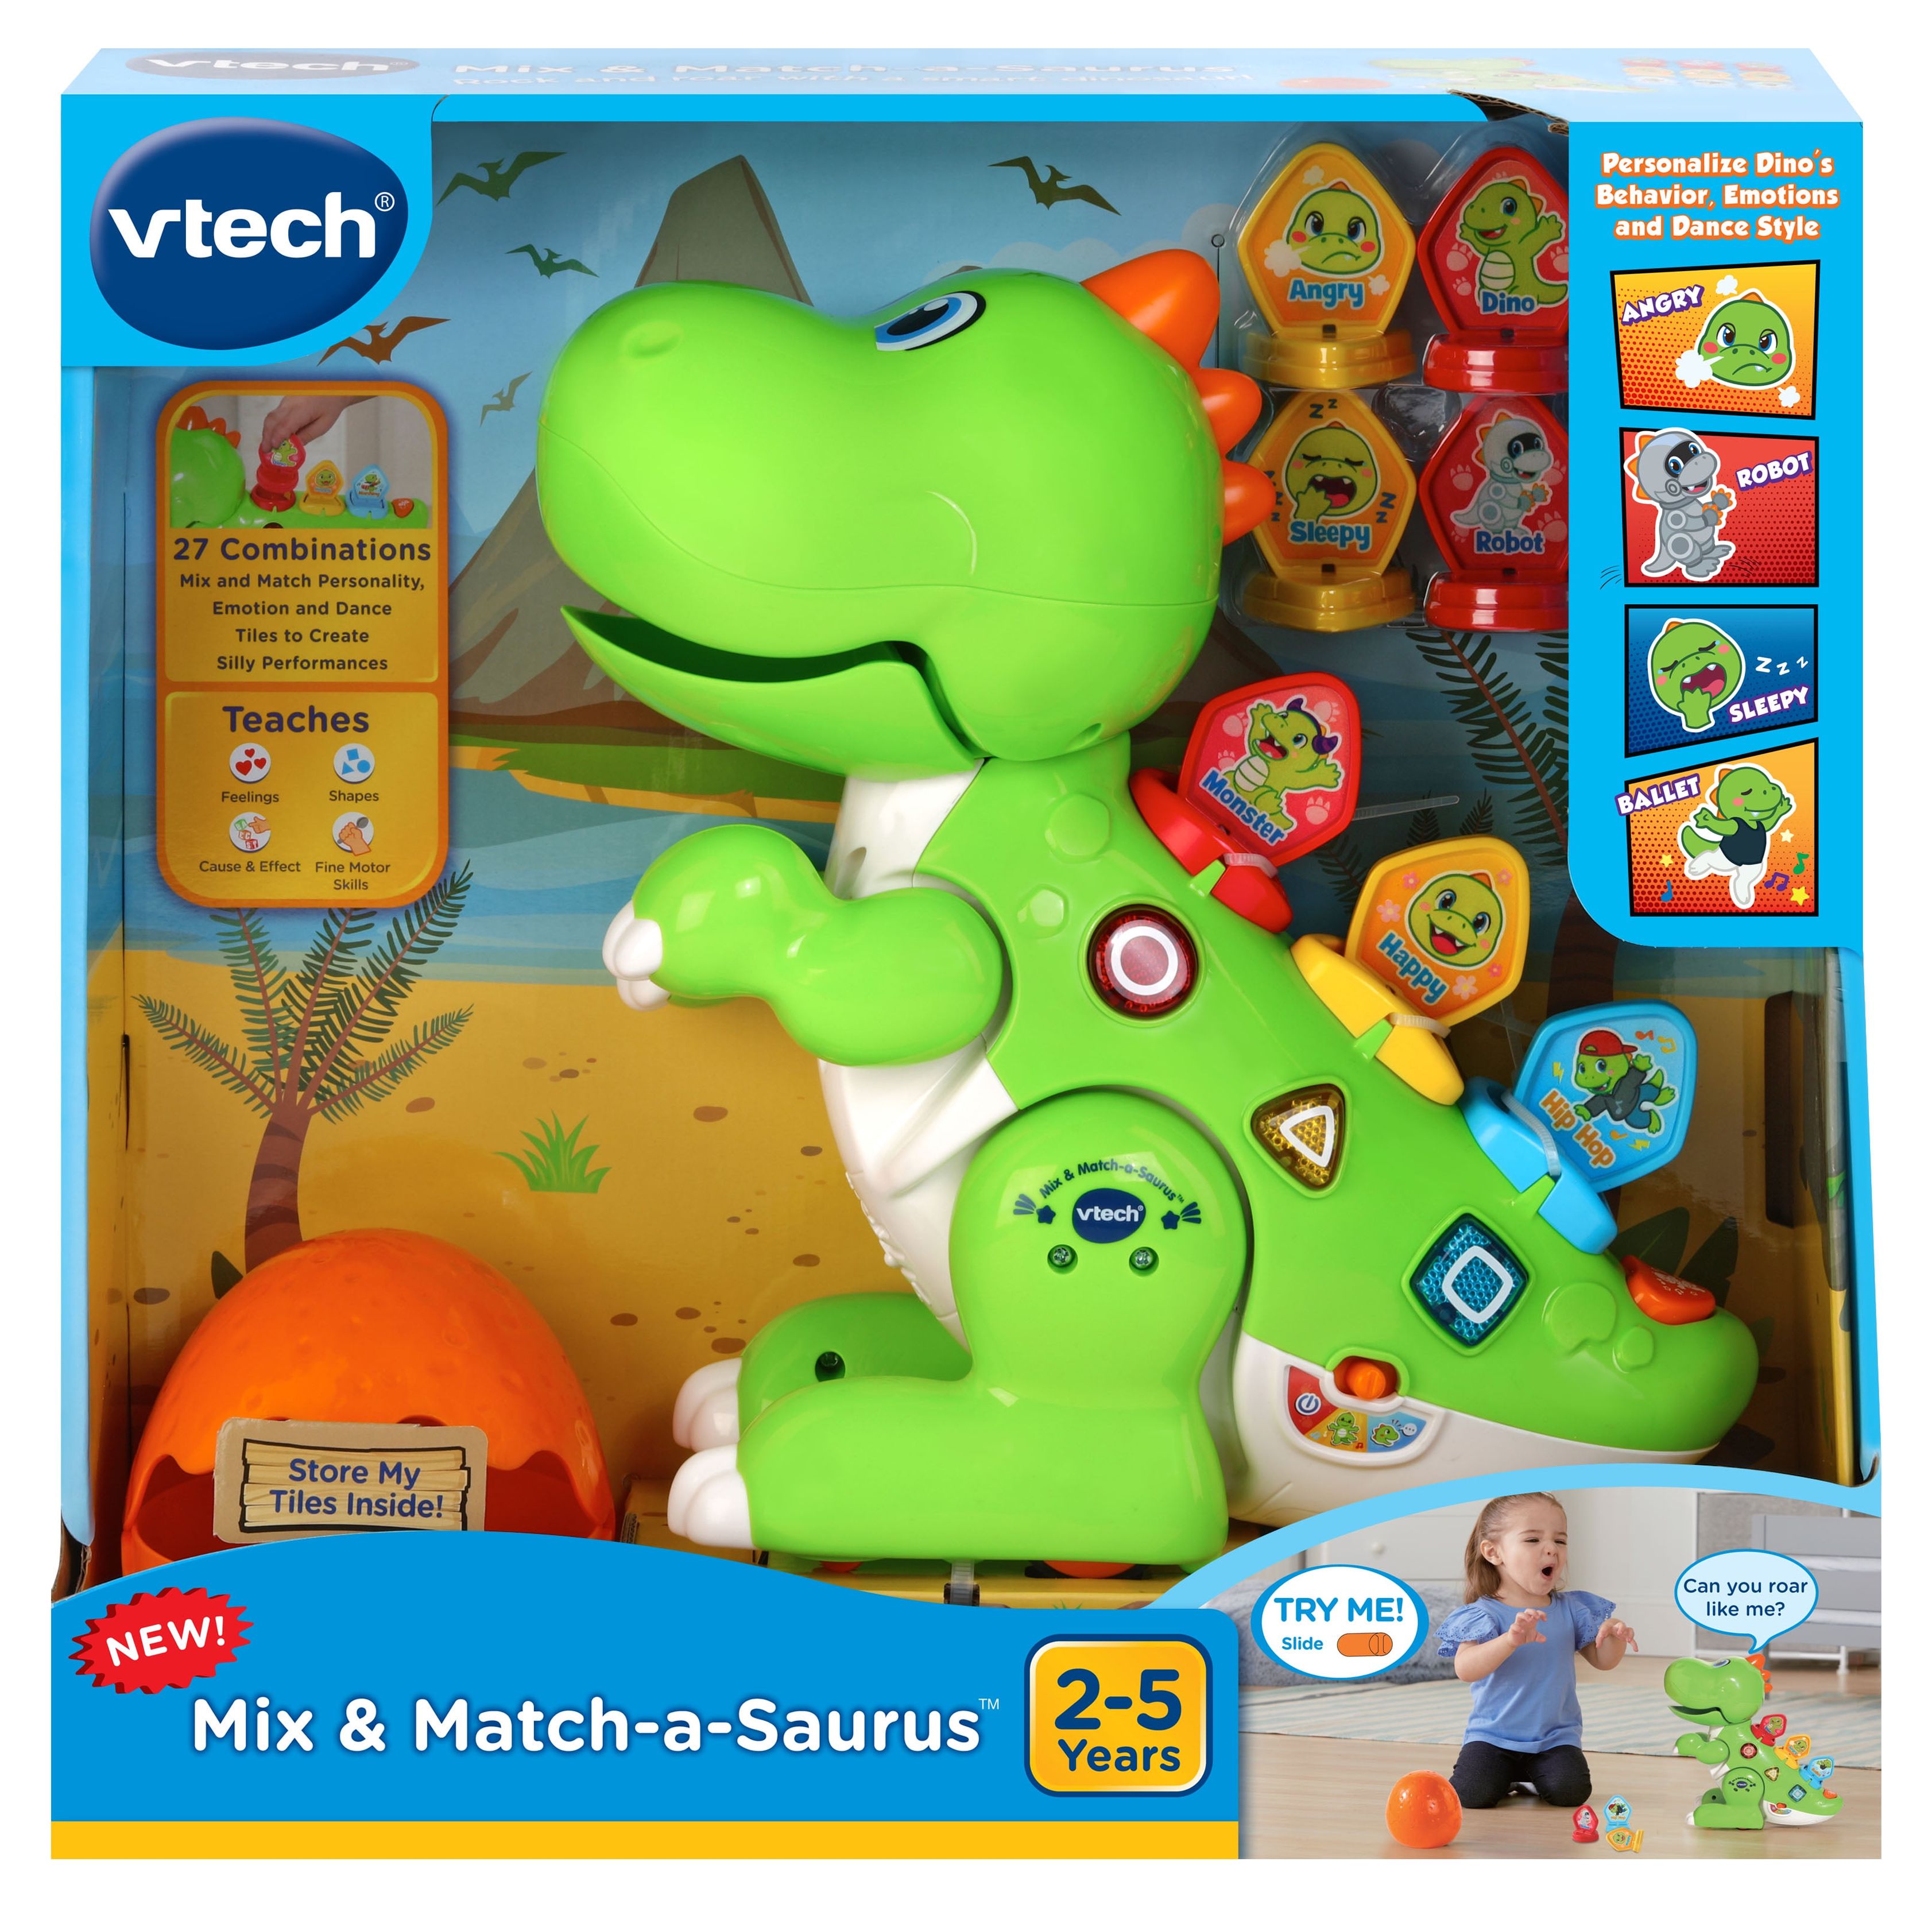 VTech Mix and Match-a-Saurus, Dinosaur Learning Toy for Kids, Green - image 9 of 10